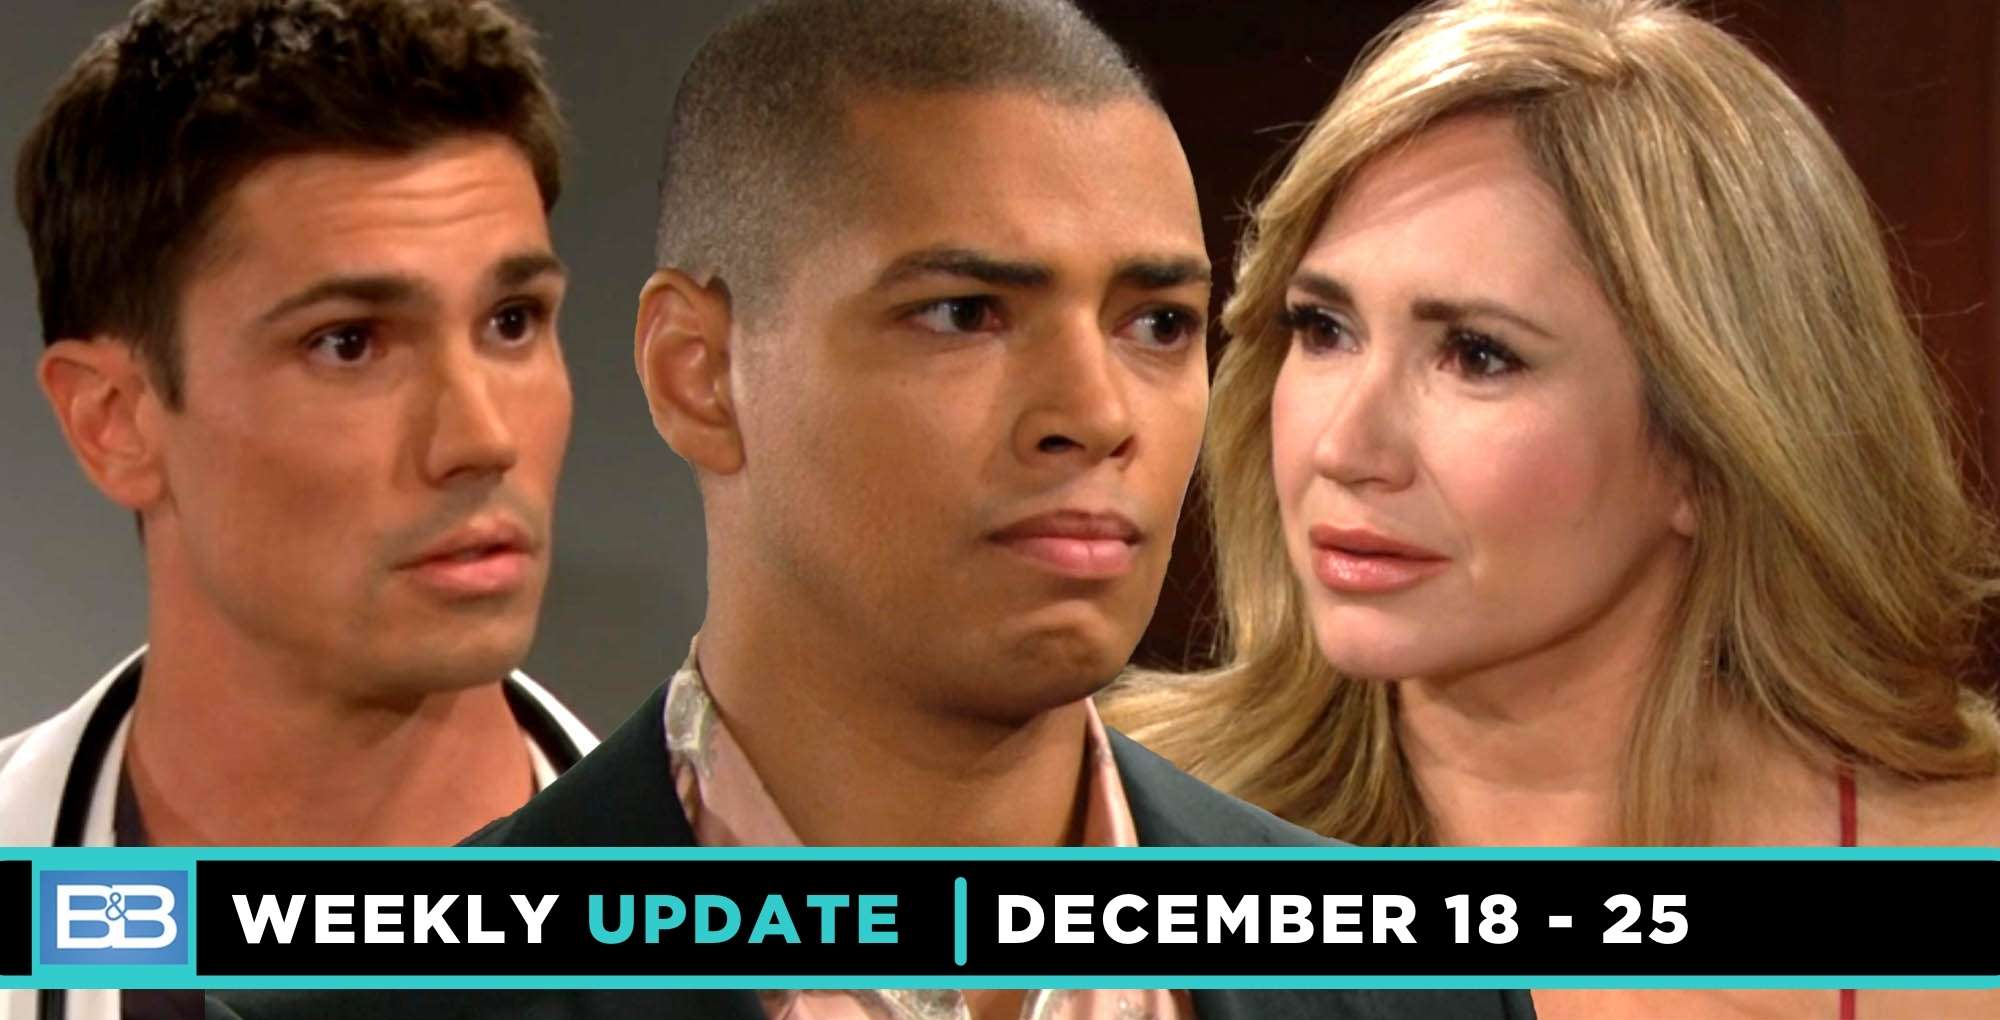 b&b spoilers weekly update with finn finnegan, zende forrester, and bridget forrester.